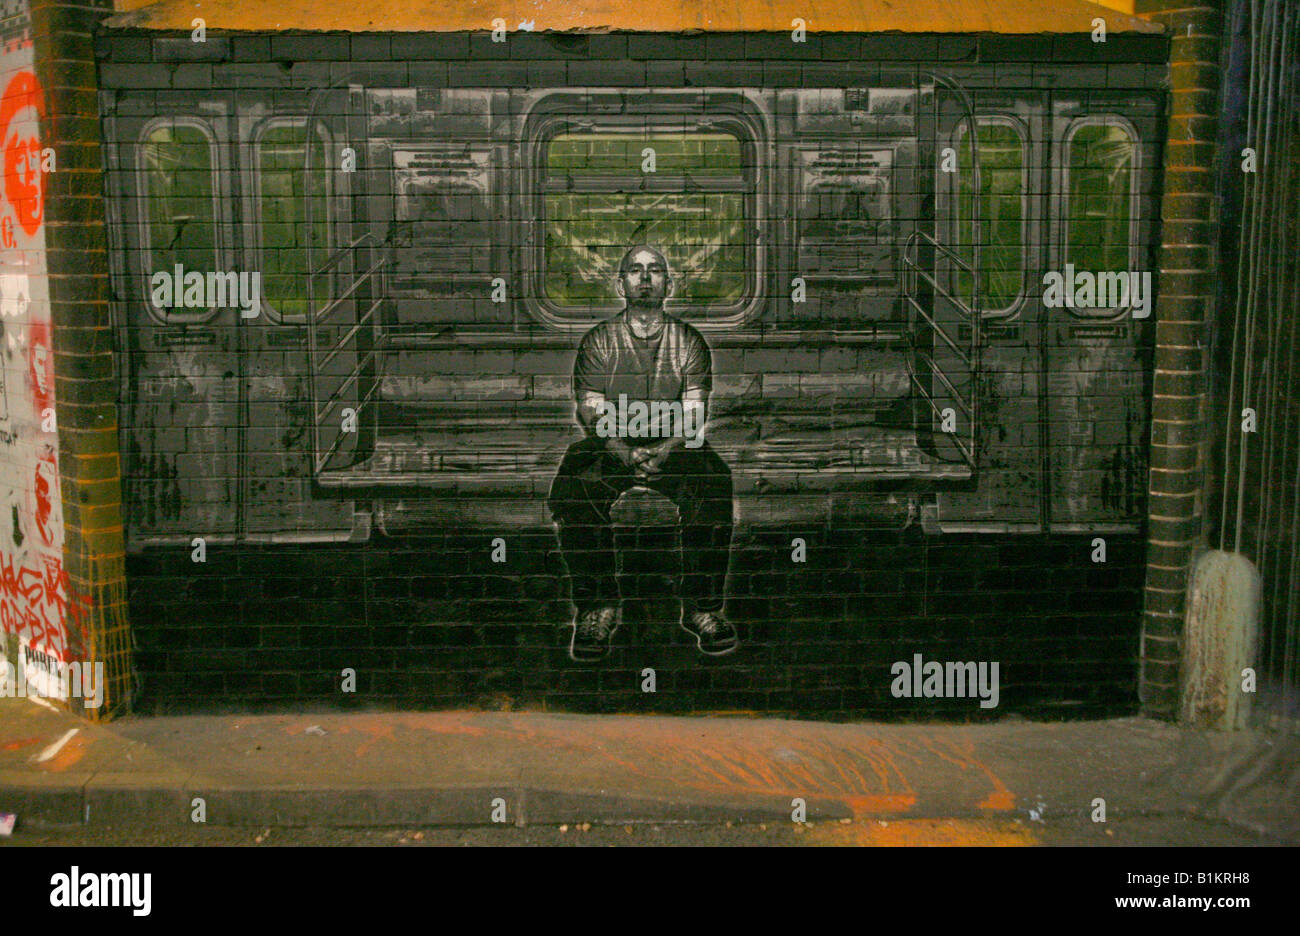 Artwork of a New York Subway carriage by steeev Stock Photo